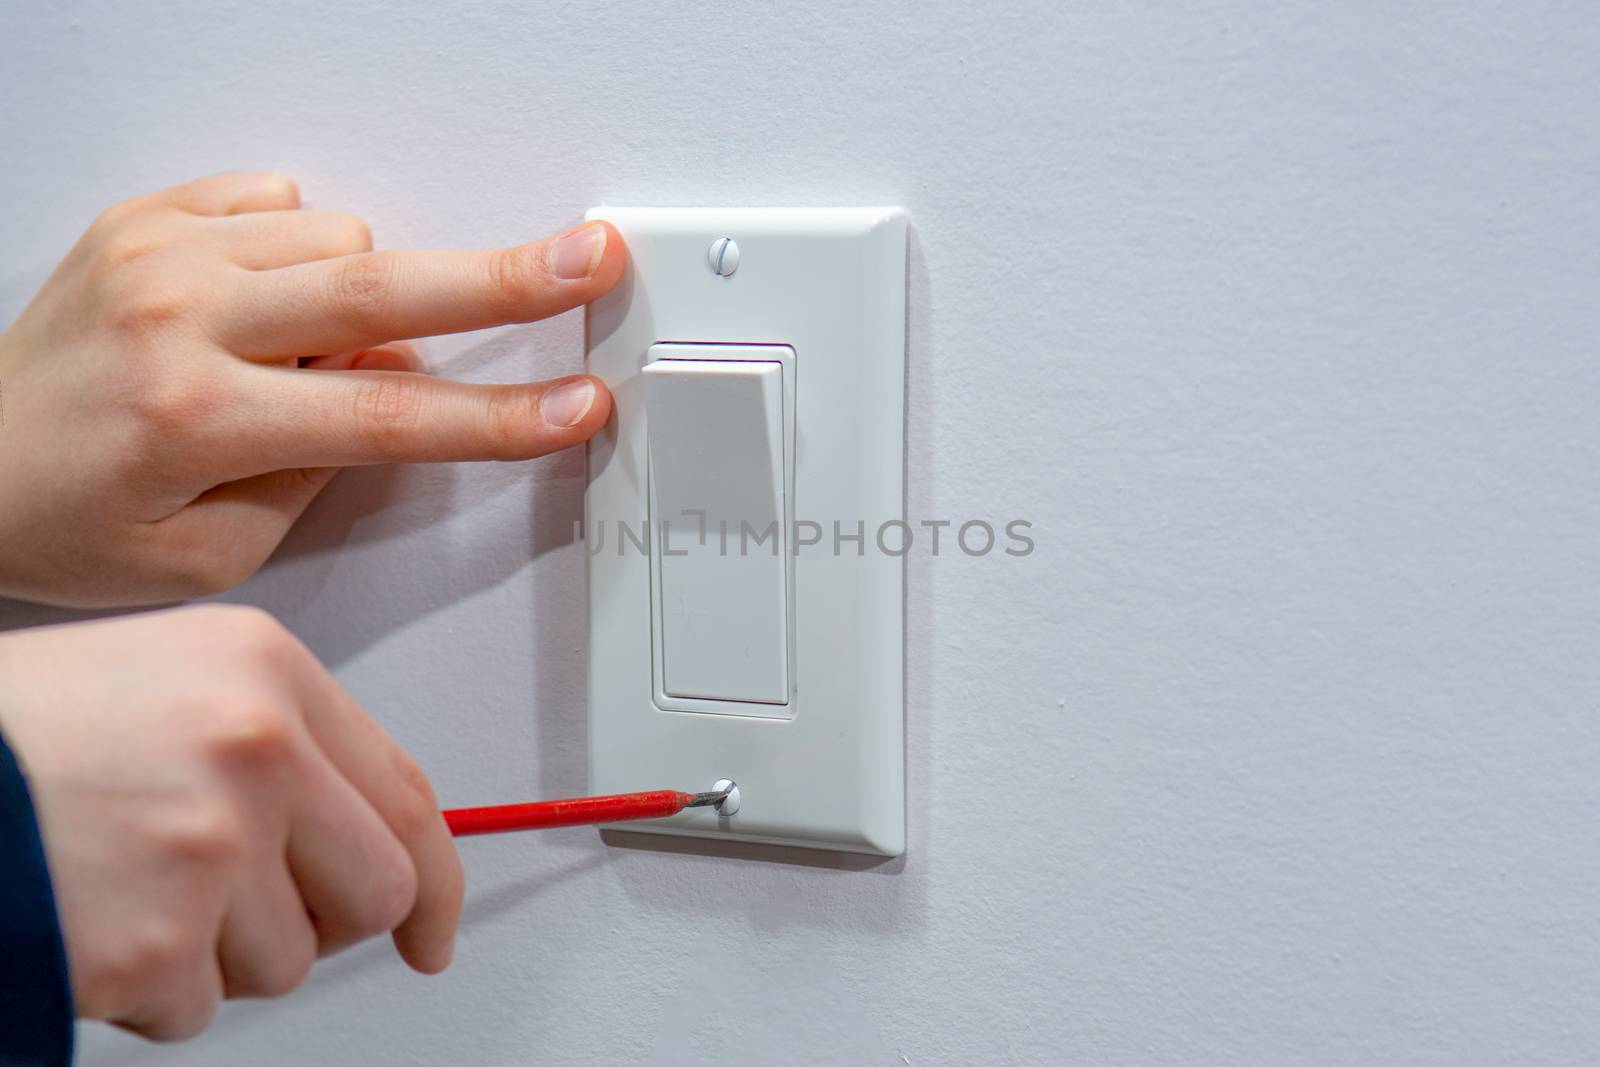 Attaching a white platband to an electric wall switch